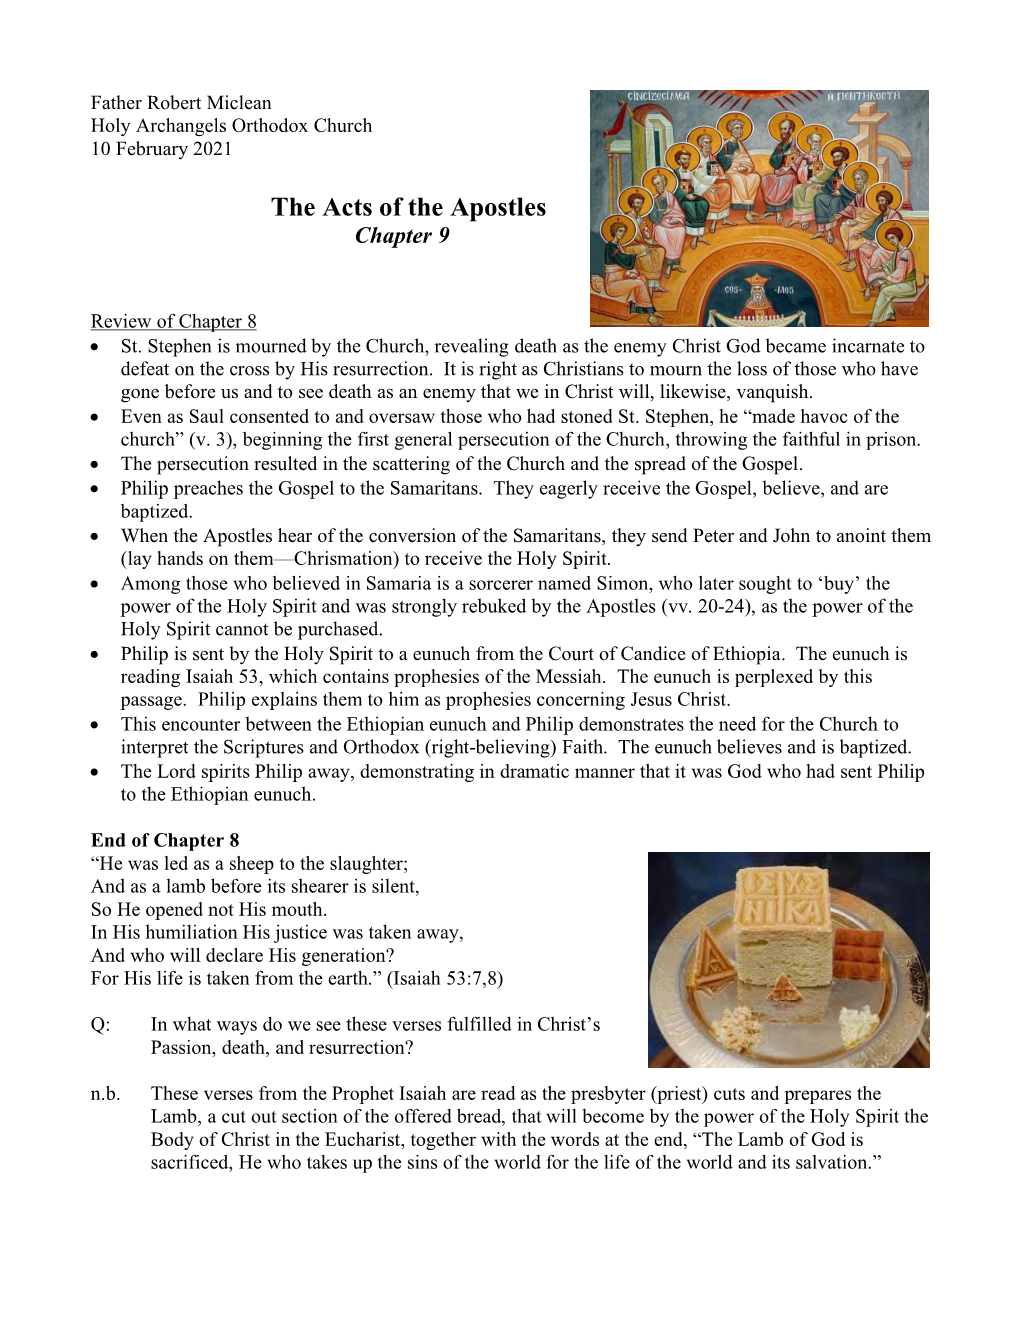 Acts-Of-The-Apostles-Chapter-9